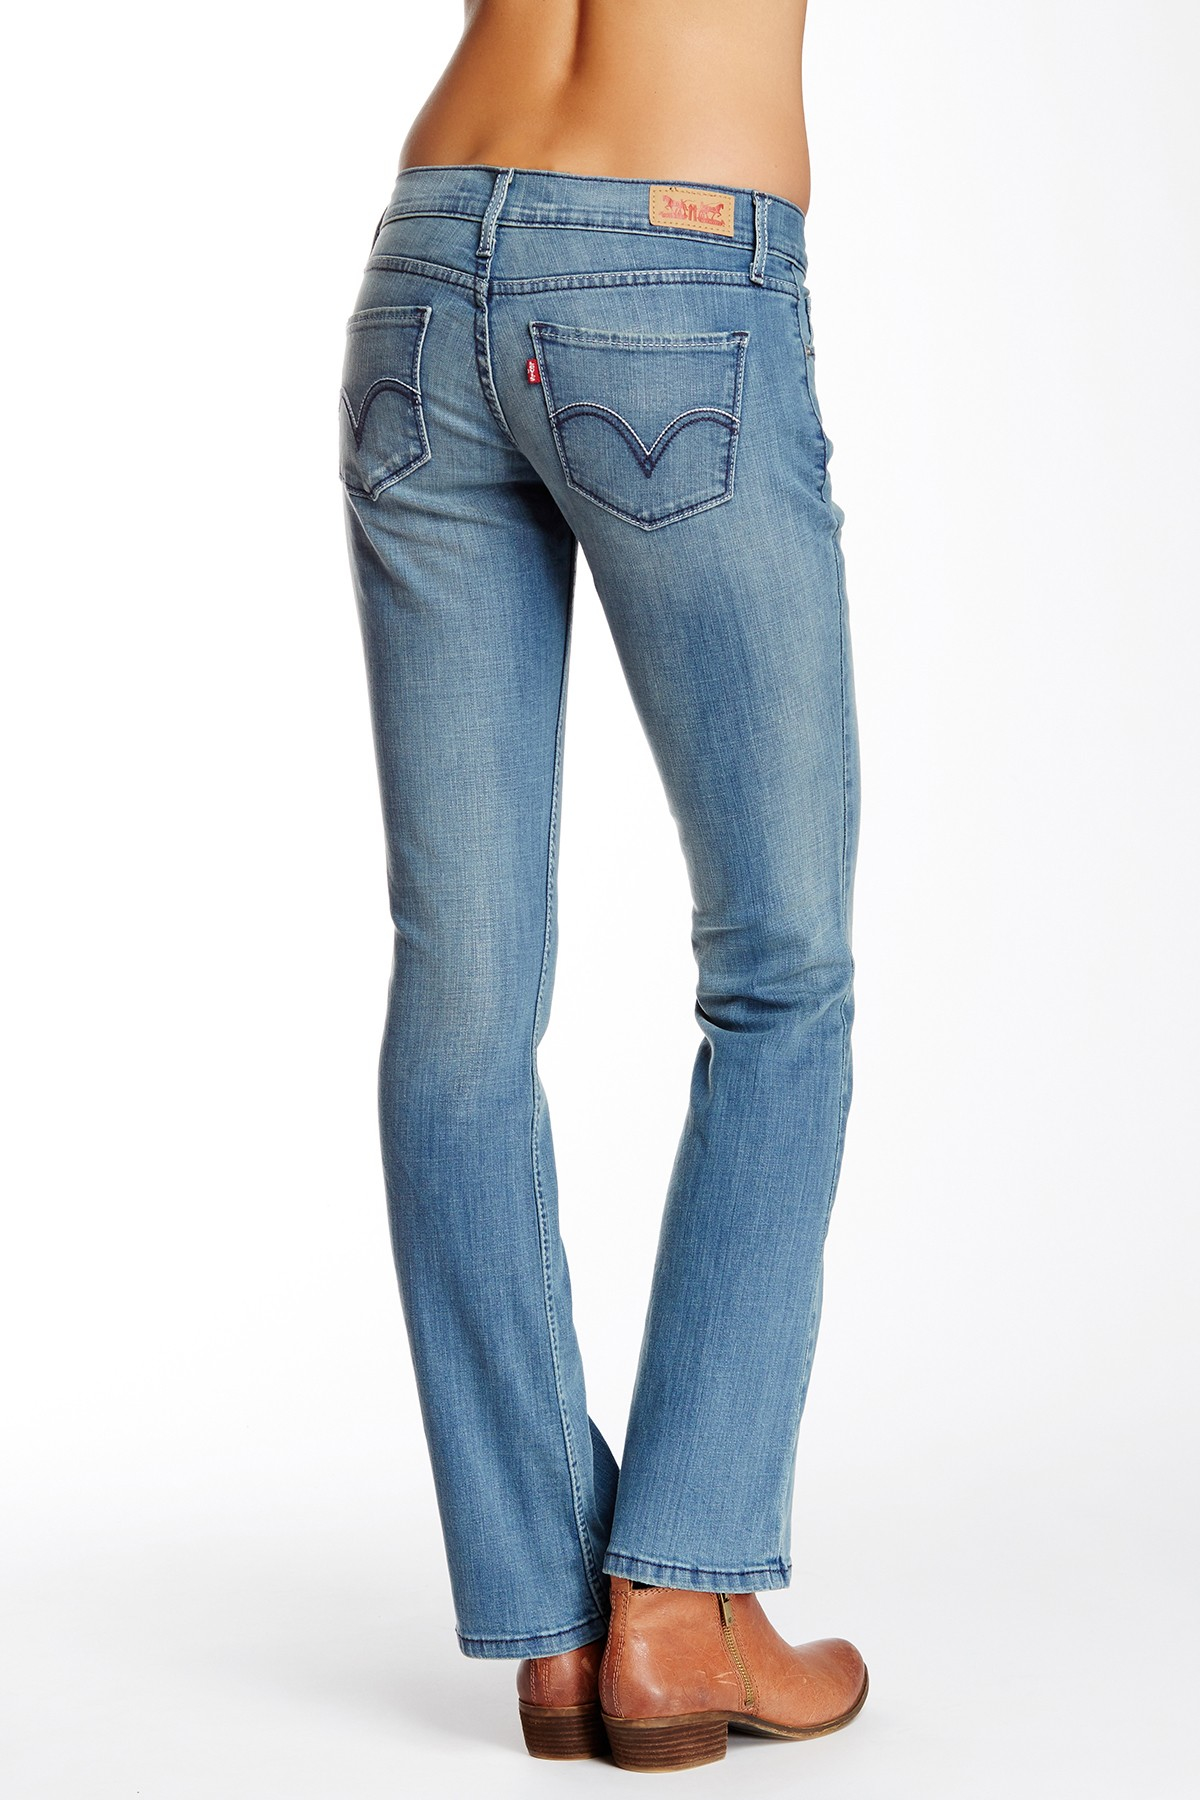 Levi's Too Superlow 524 Jeans Bootcut Offers Shop, Save 68% 